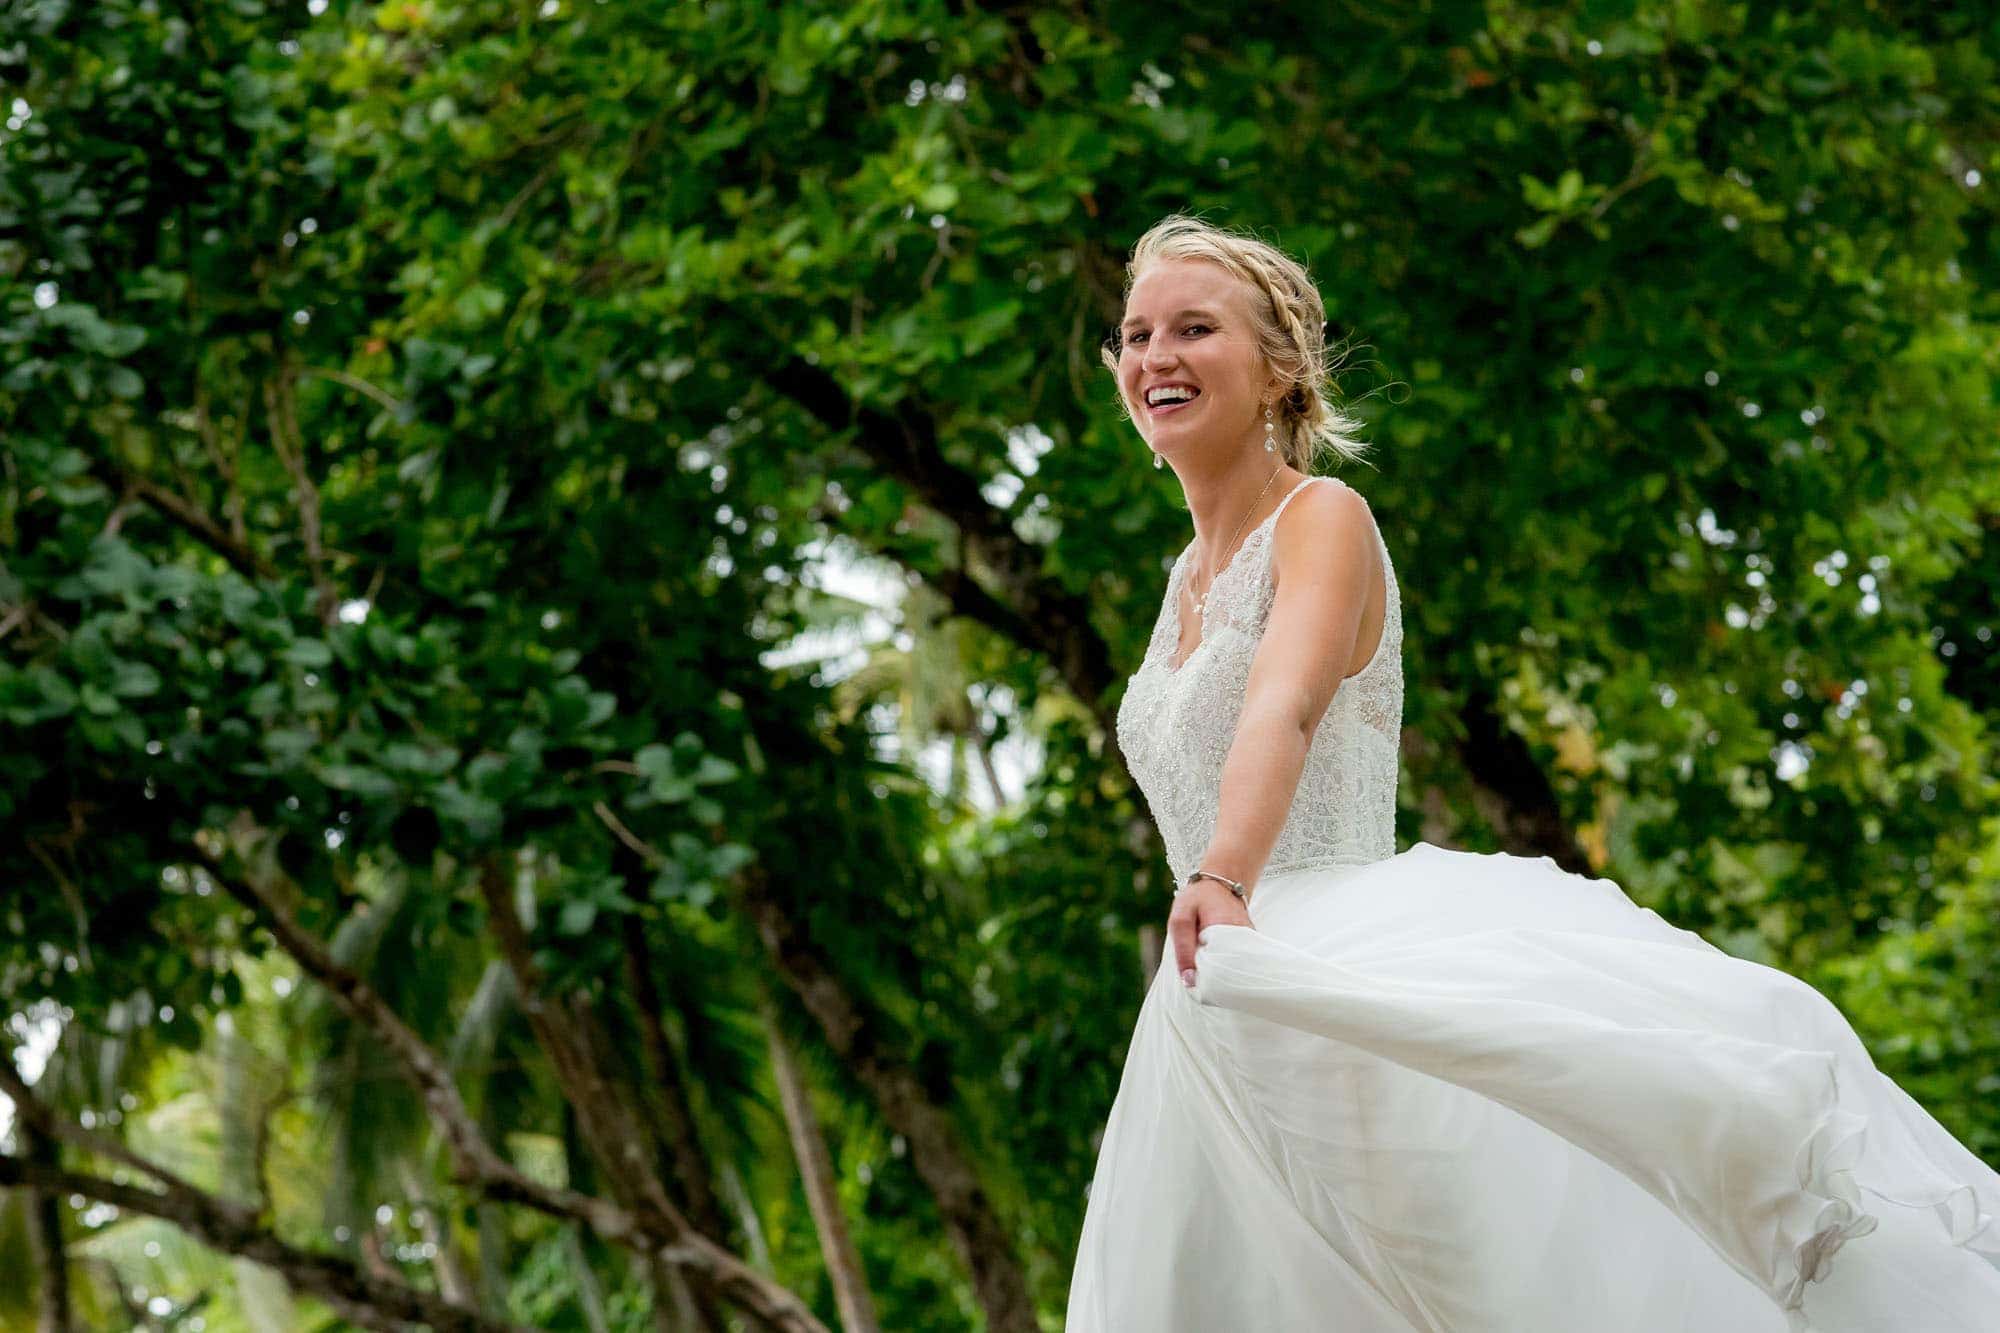 Bridal portraits after the church wedding ceremony on the beach